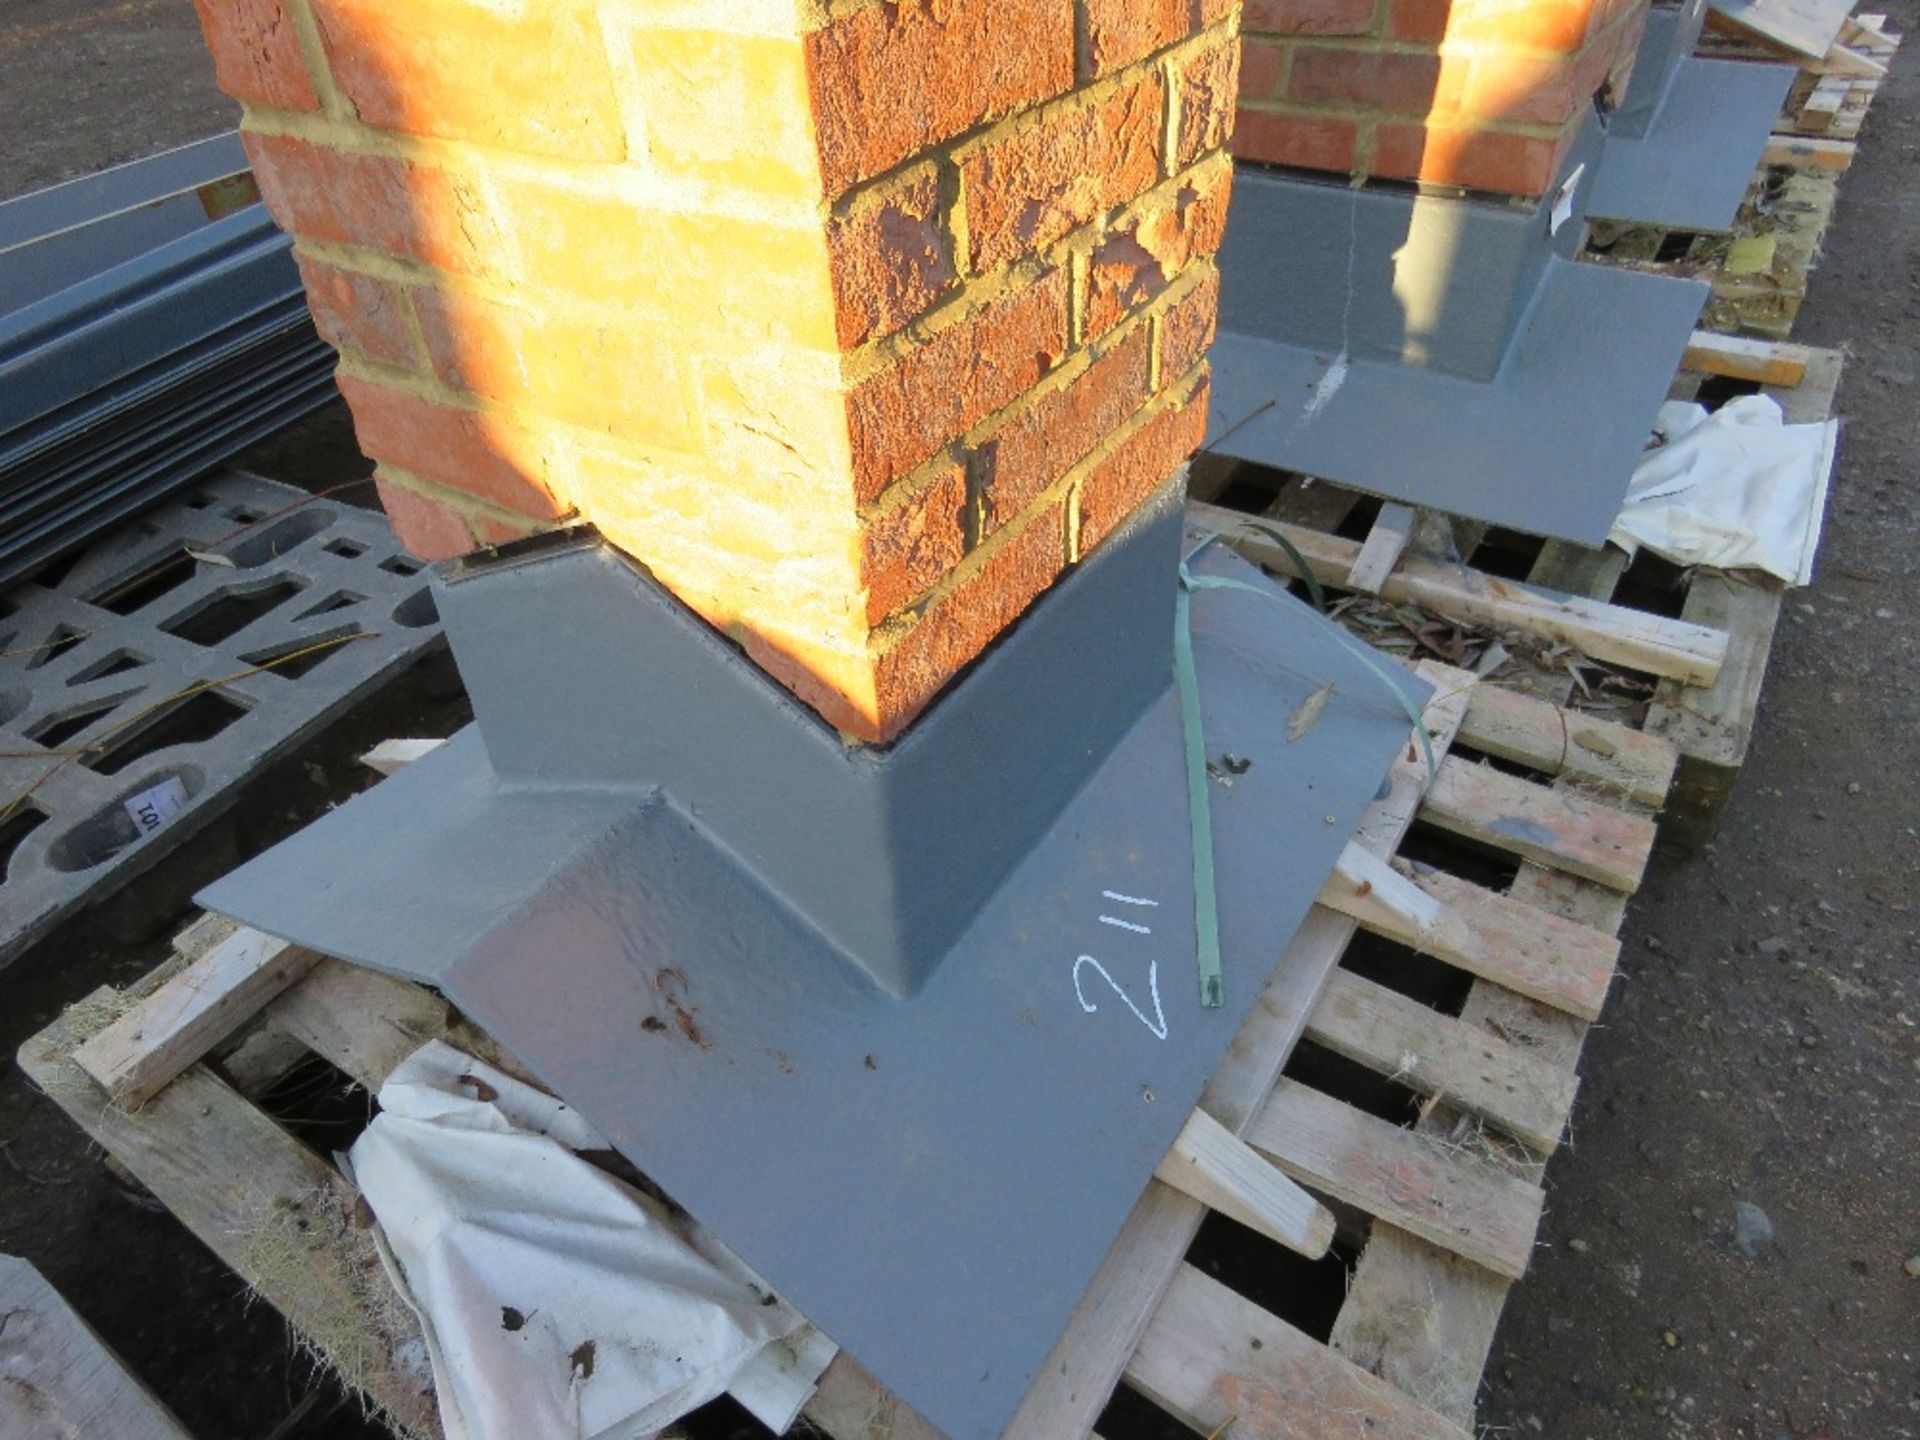 CGFMA FIBRE GLASS CHIMNEY STACK. GRP CENTRE AND BASE WITH REAL BRICK FACING. BELIEVED TO BE 25 DEGR - Image 3 of 3